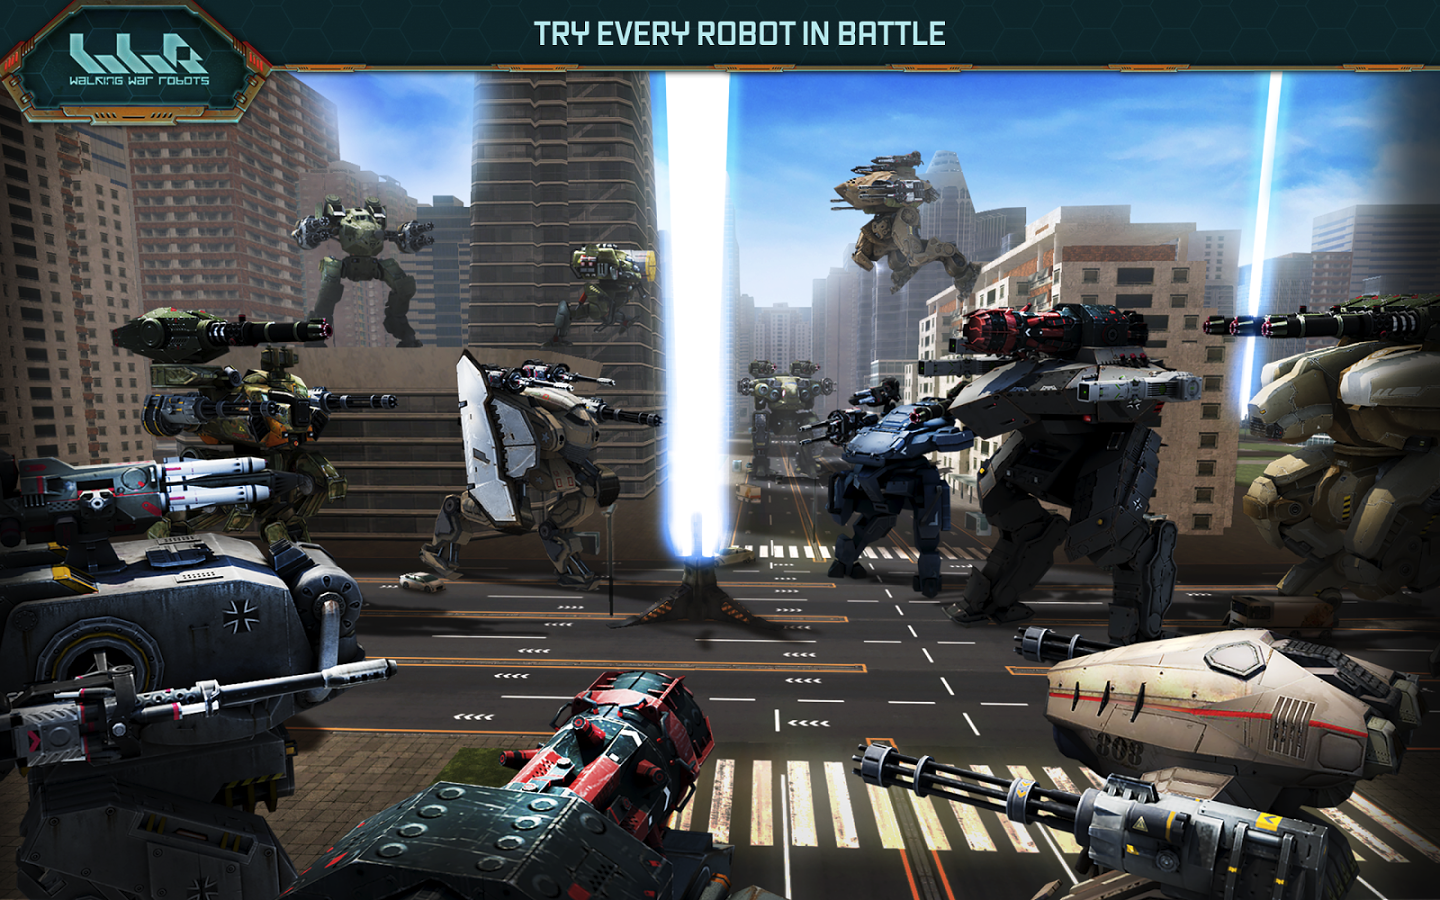 Be The Meanest Robot Pilot Rule Battlefield In